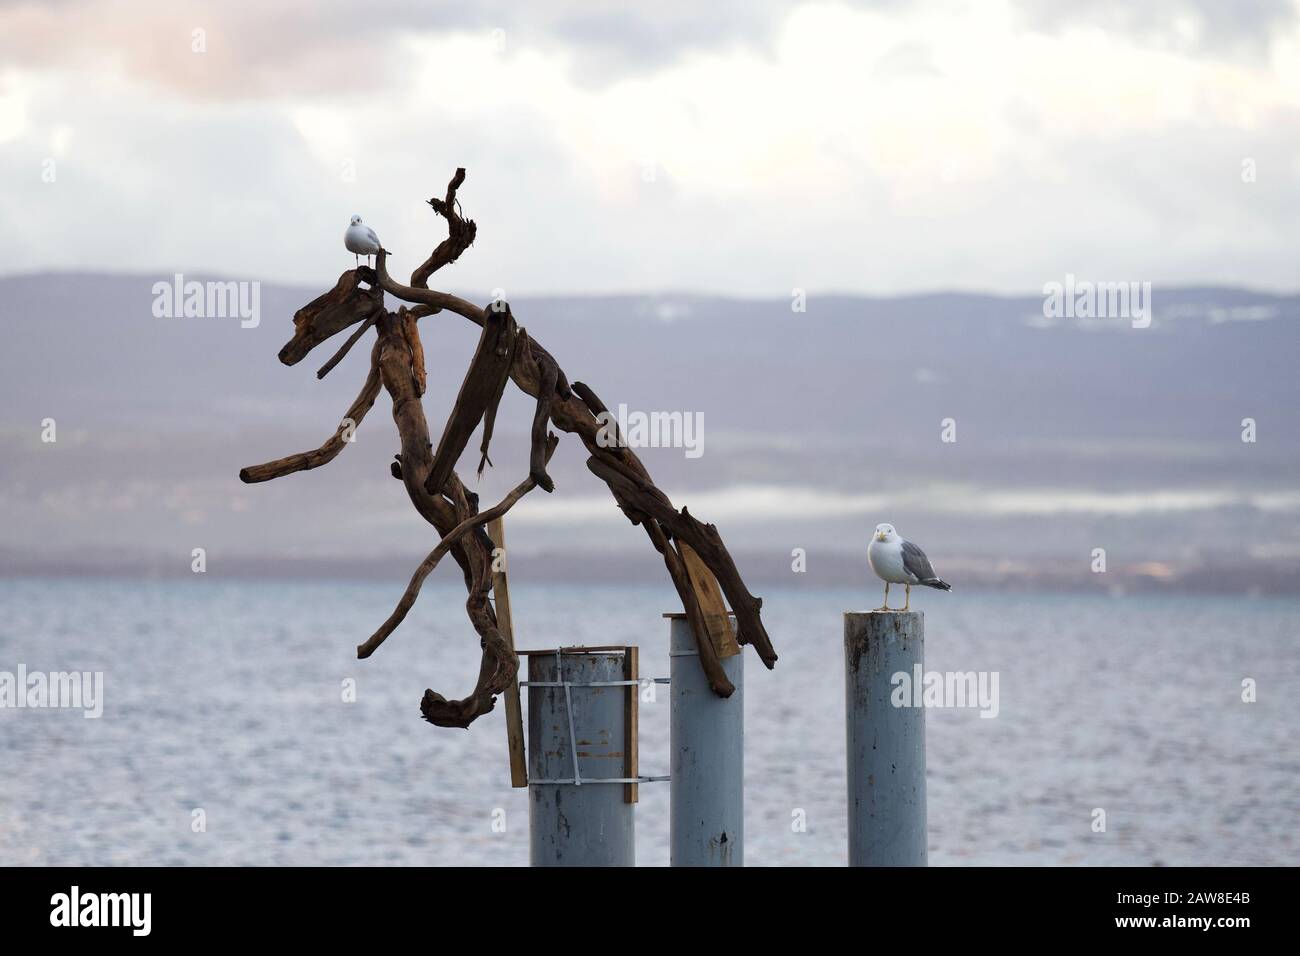 A seagull and a gull on driftwood sculptures from the Flottins Village which takes place for a few weeks until Christmas time in Evian-Les-Bains, on t Stock Photo